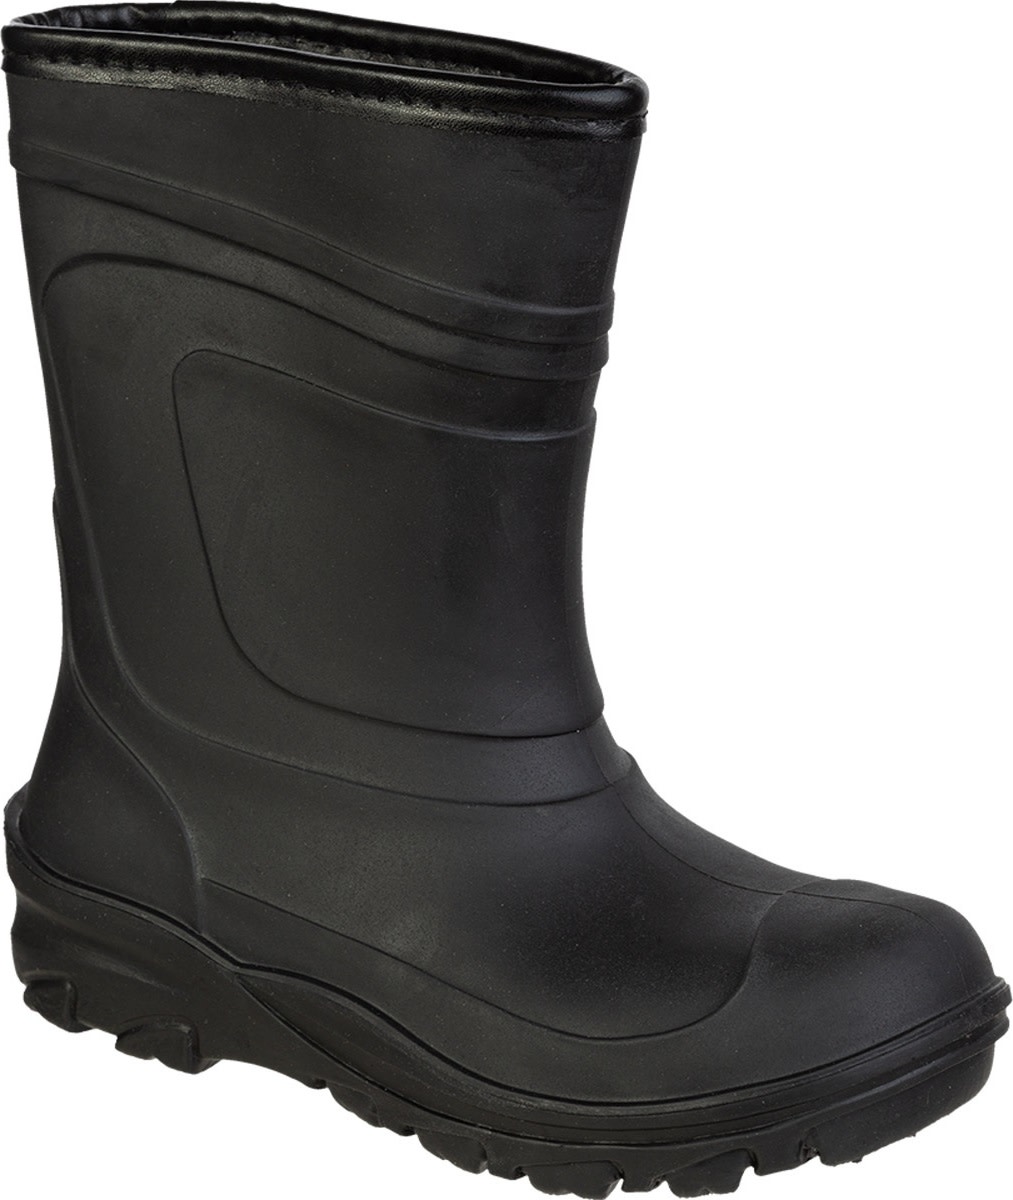 Kids\' FianThermo Boot Black | Buy Kids\' FianThermo Boot Black here |  Outnorth